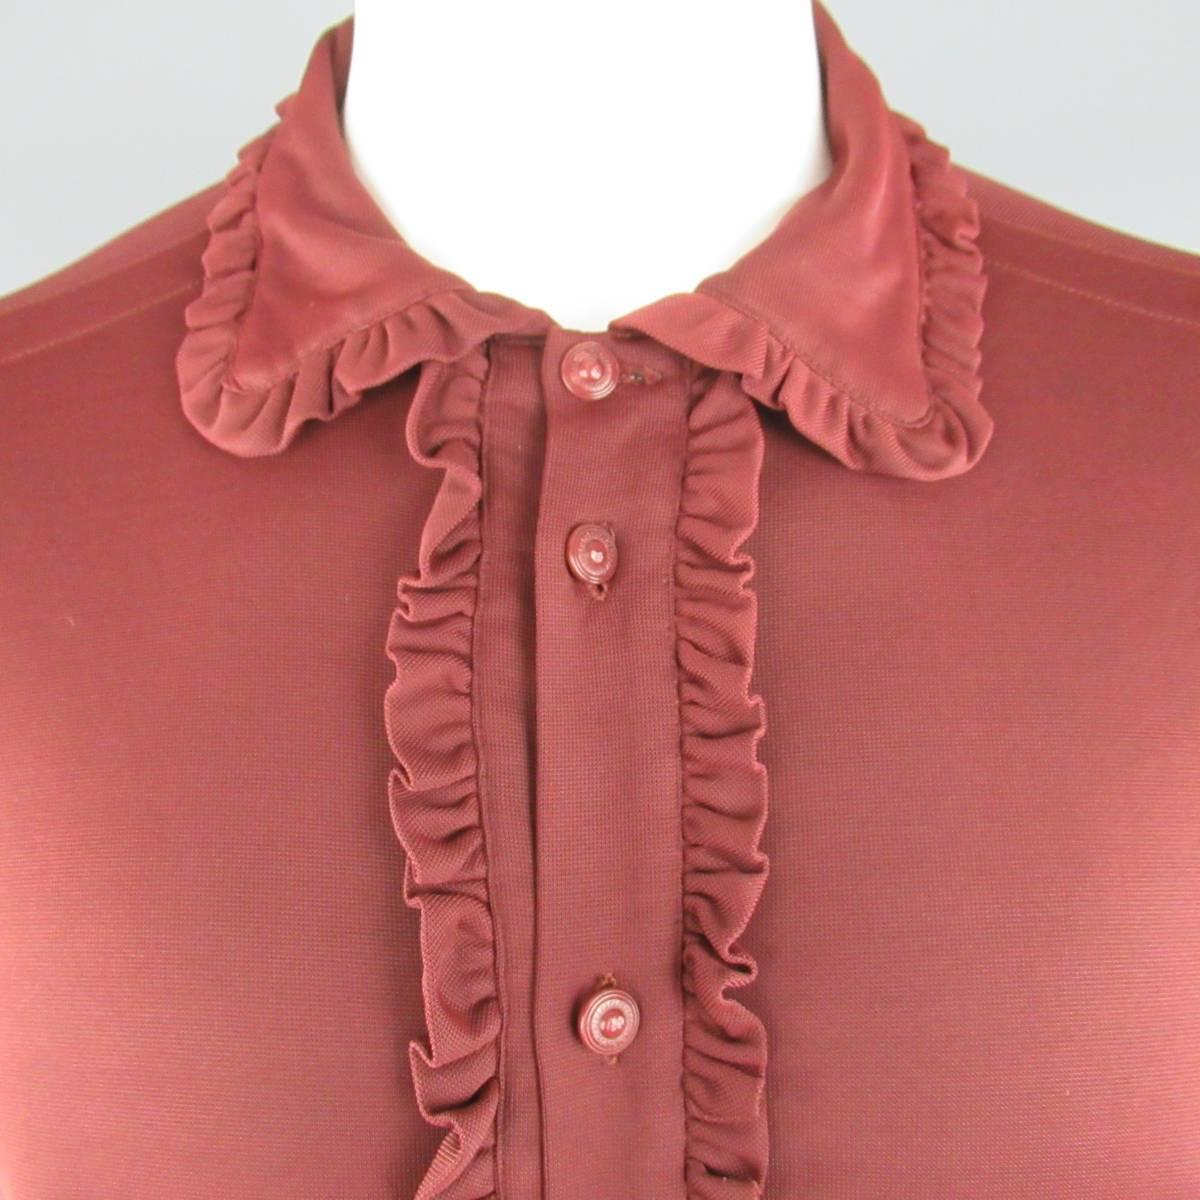 Vintage VERSUS by GIANNI VERSACE shirt comes in a soft polimide fabric featuring a pointed collar, monochromatic tone engraved buttons, and ruffled trim throughout. Made in Italy.
 
Excellent Pre-Owned Condition.
Marked: (tag removed)
